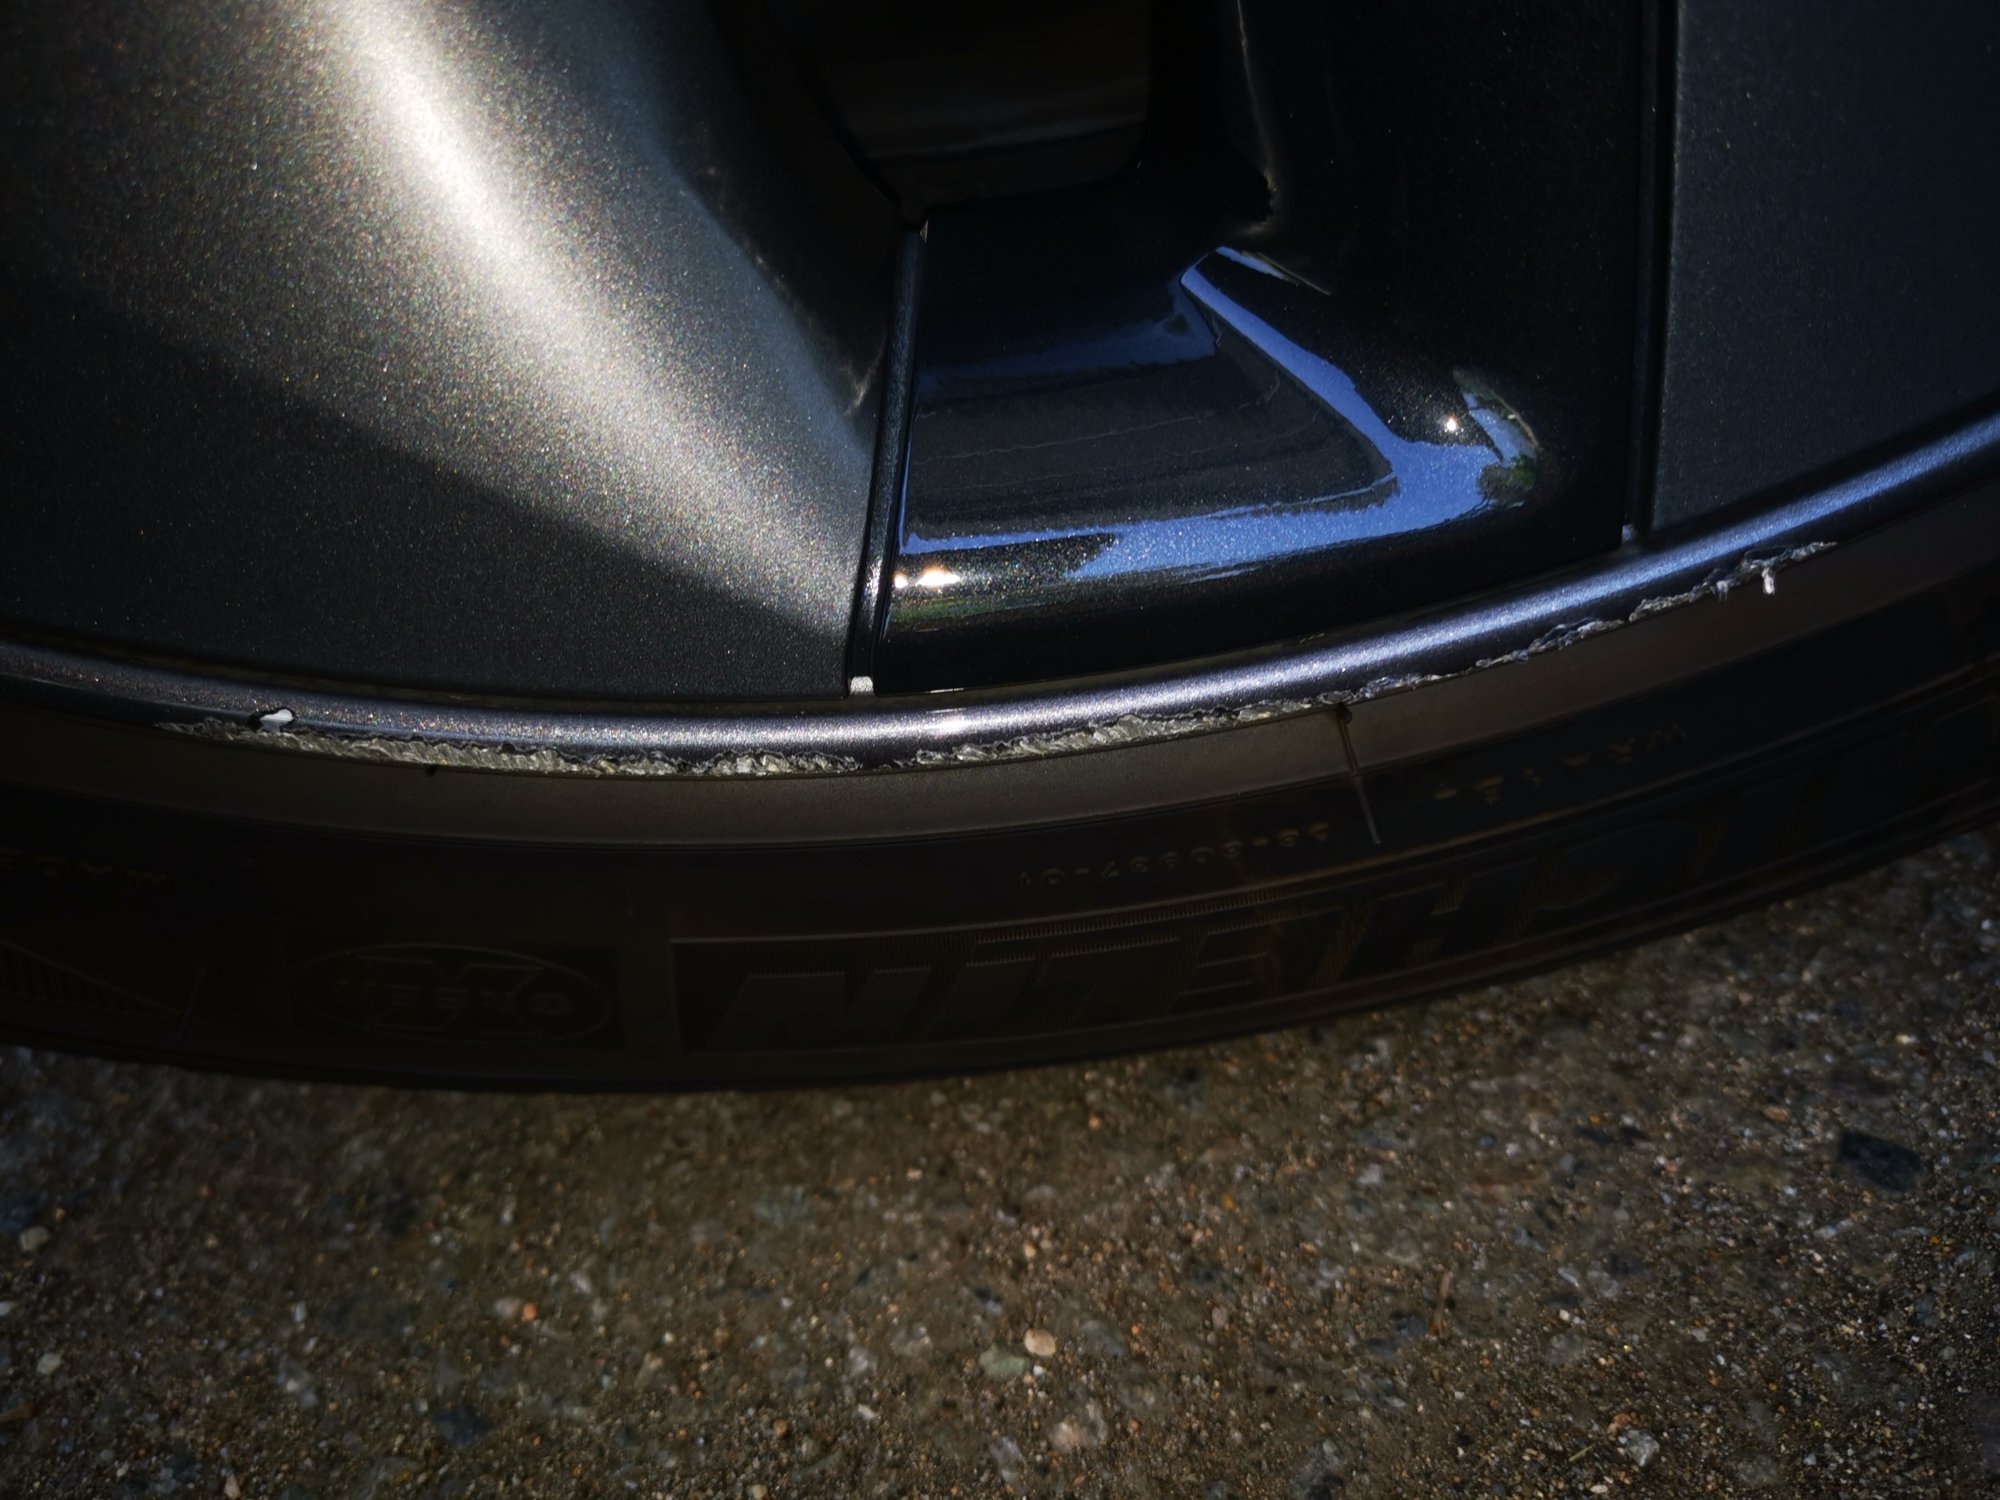 I scratched my car driving onto the curb- WHAT TO DO HELP PLEASE